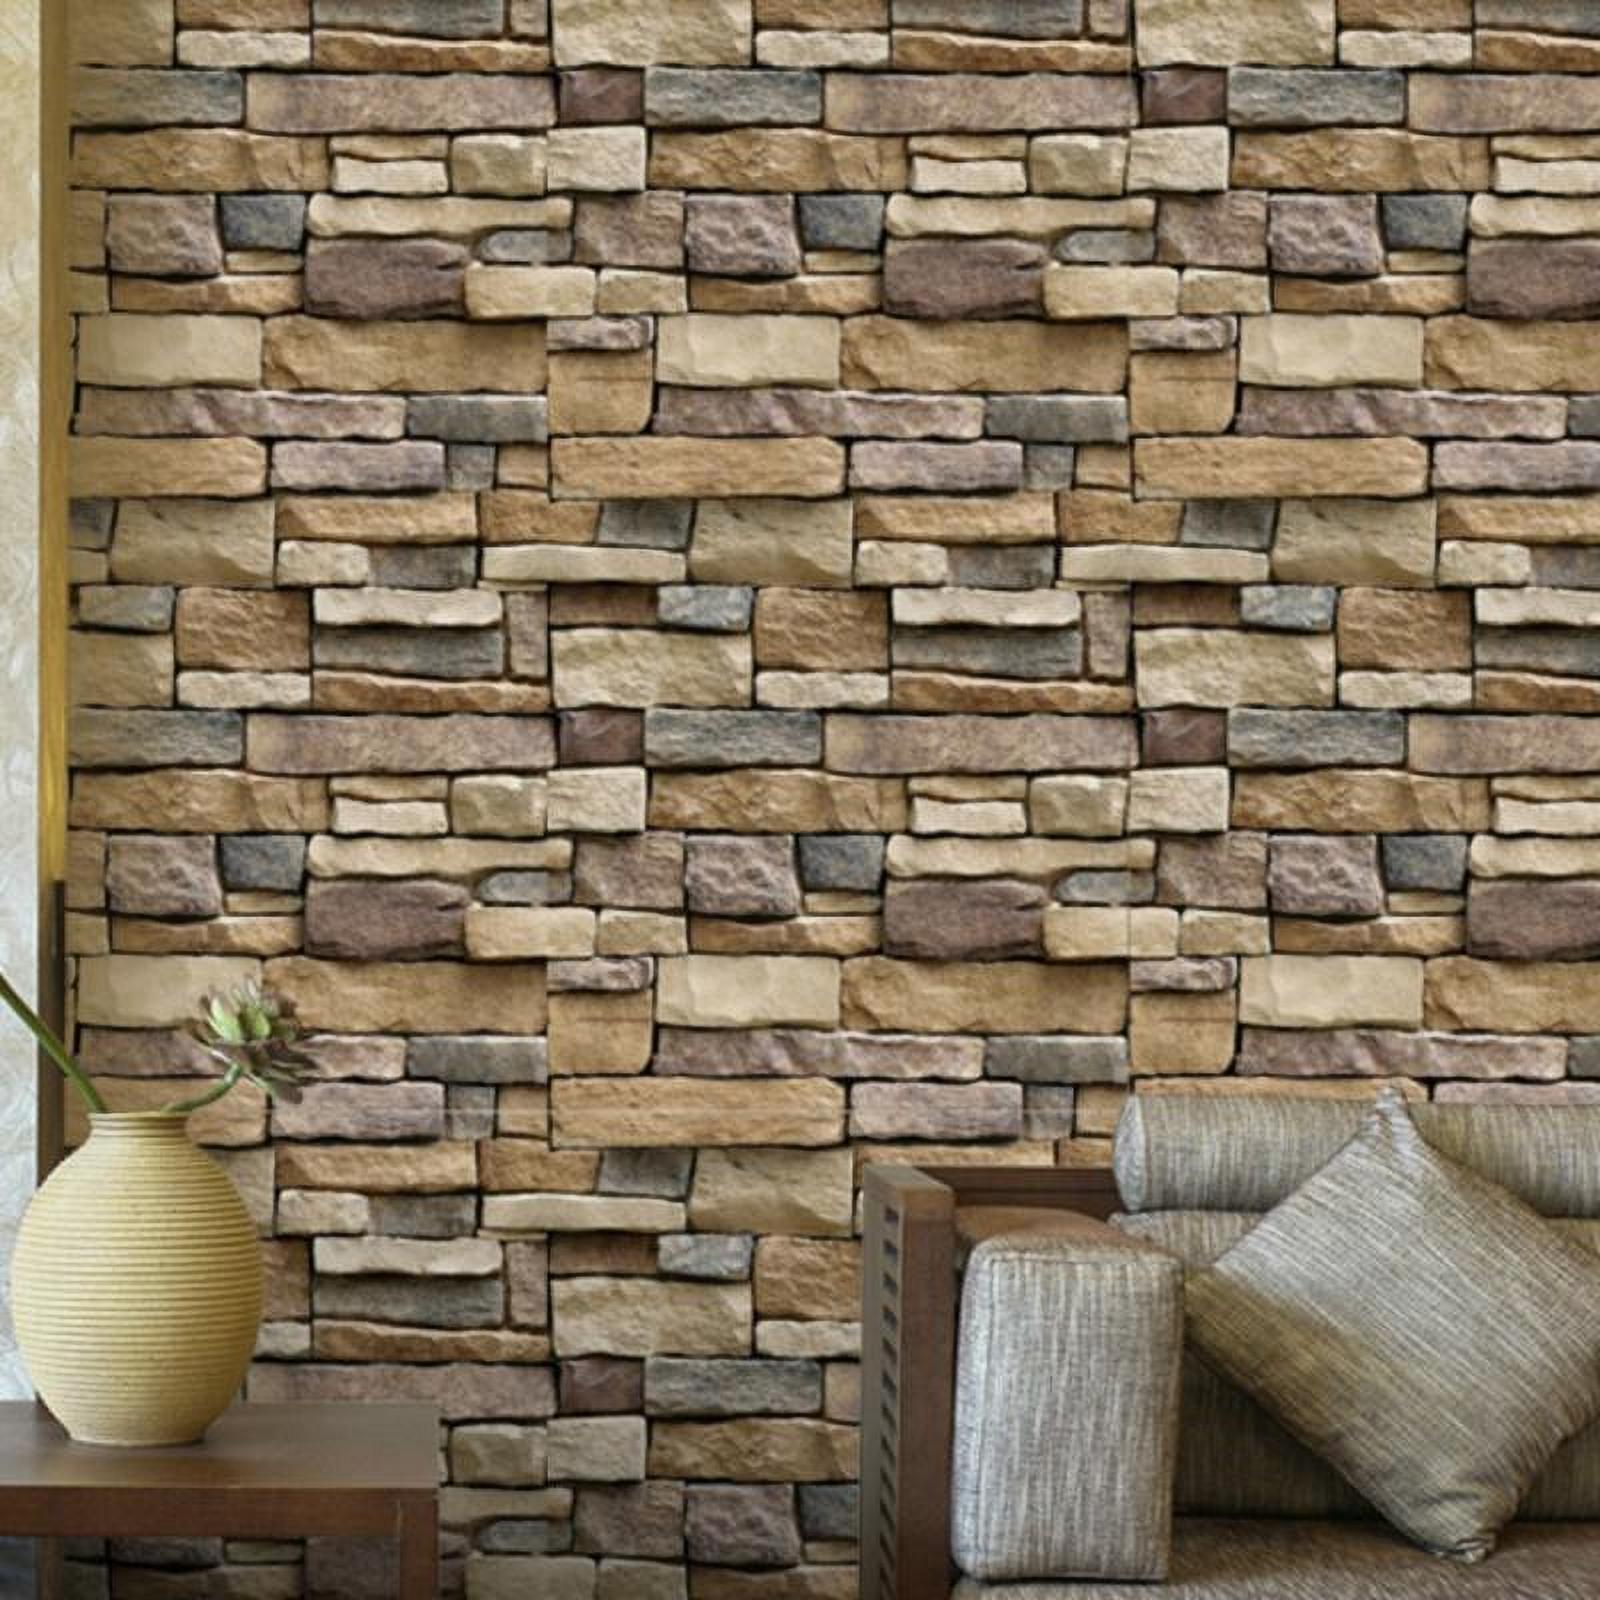 Keimprove 3D Brick Wall Stickers Self-Adhesive PVC Wallpaper Peel and Stick 3D Art Wall Panels for Living Room Bedroom Background Wall Decoration,Wall Panels Peel and Stick Wallpaper - image 4 of 7